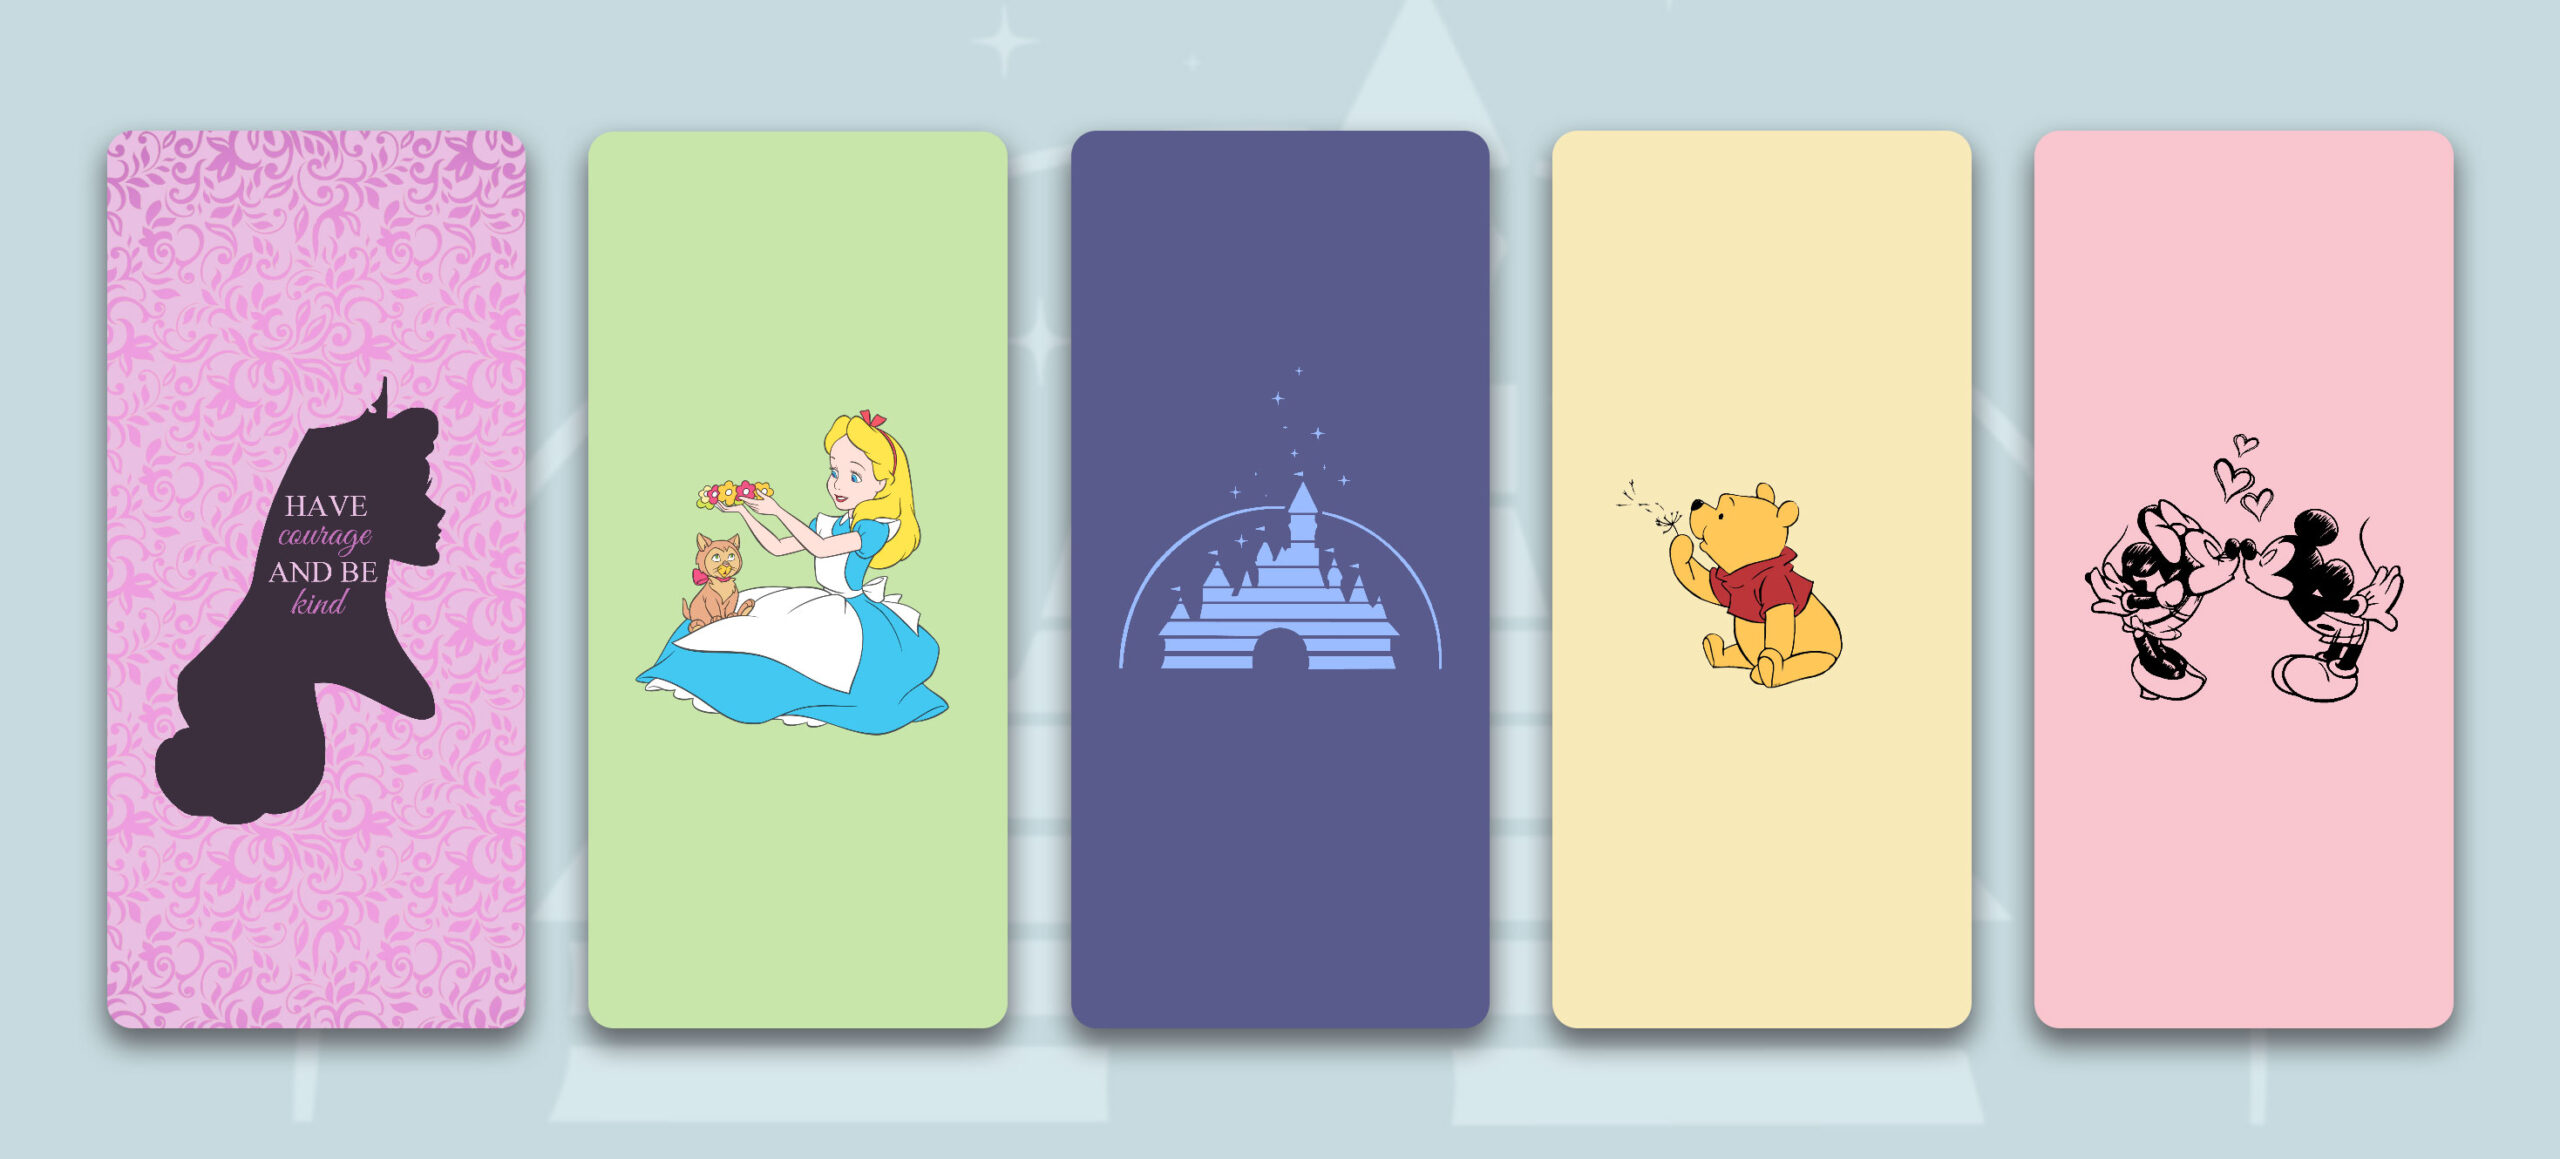 Disney App Icons iOS & Android - Disney App Icons Aesthetic for iPhone